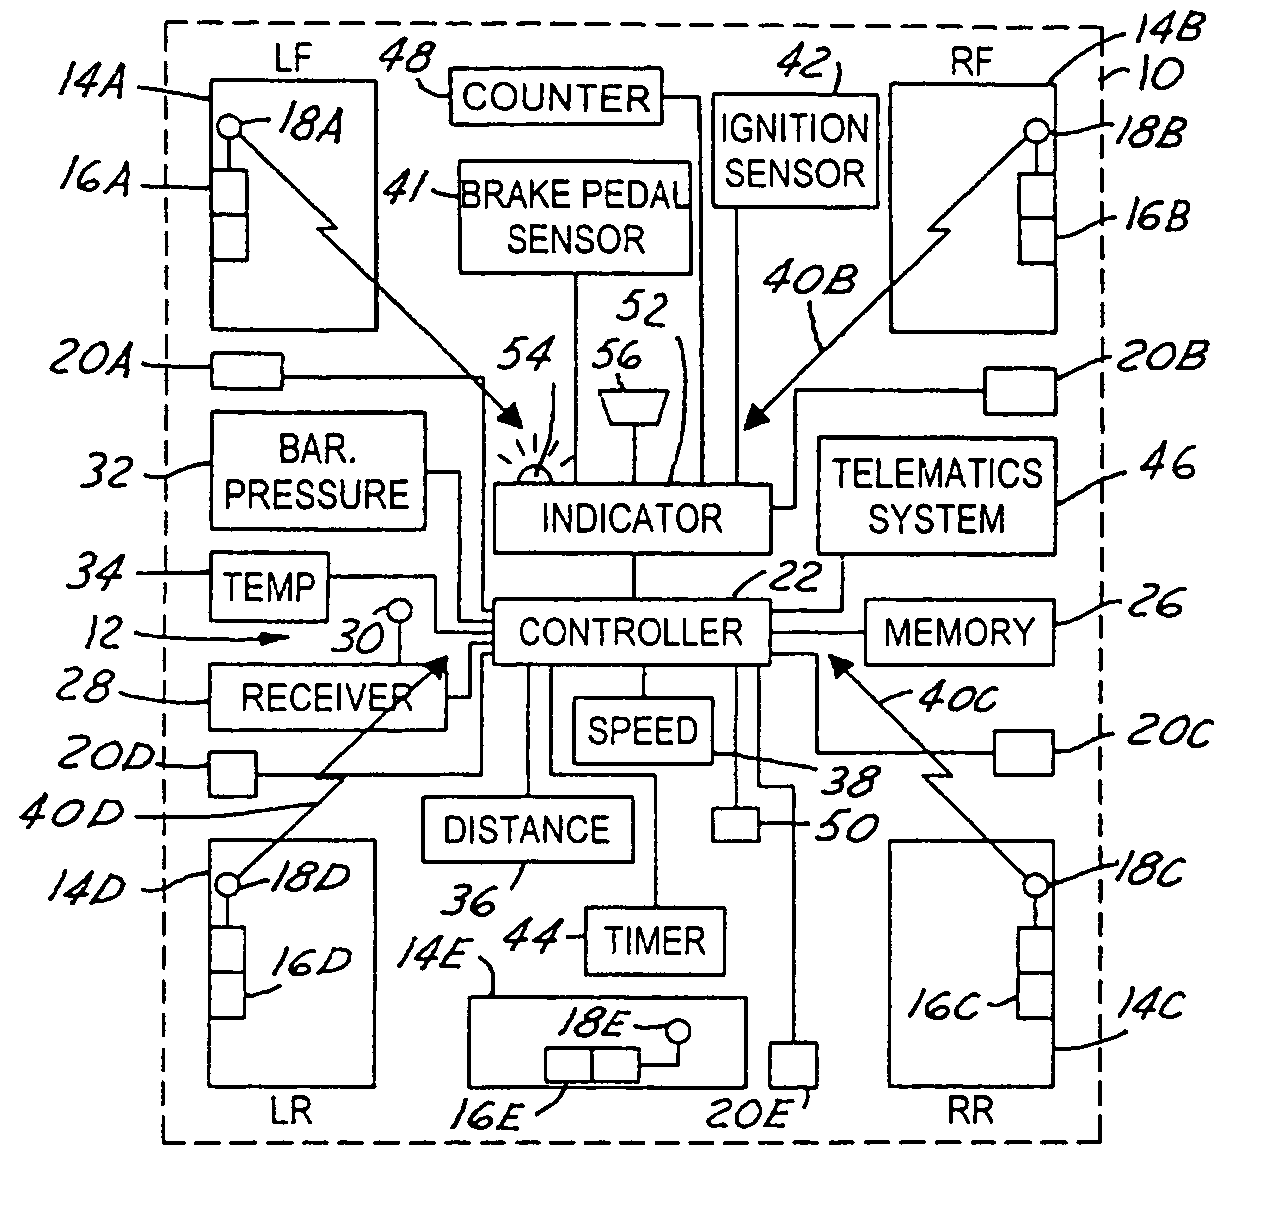 Method and system for detecting the presence of a spare replacement in a tire pressure monitoring system for an automotive vehicle